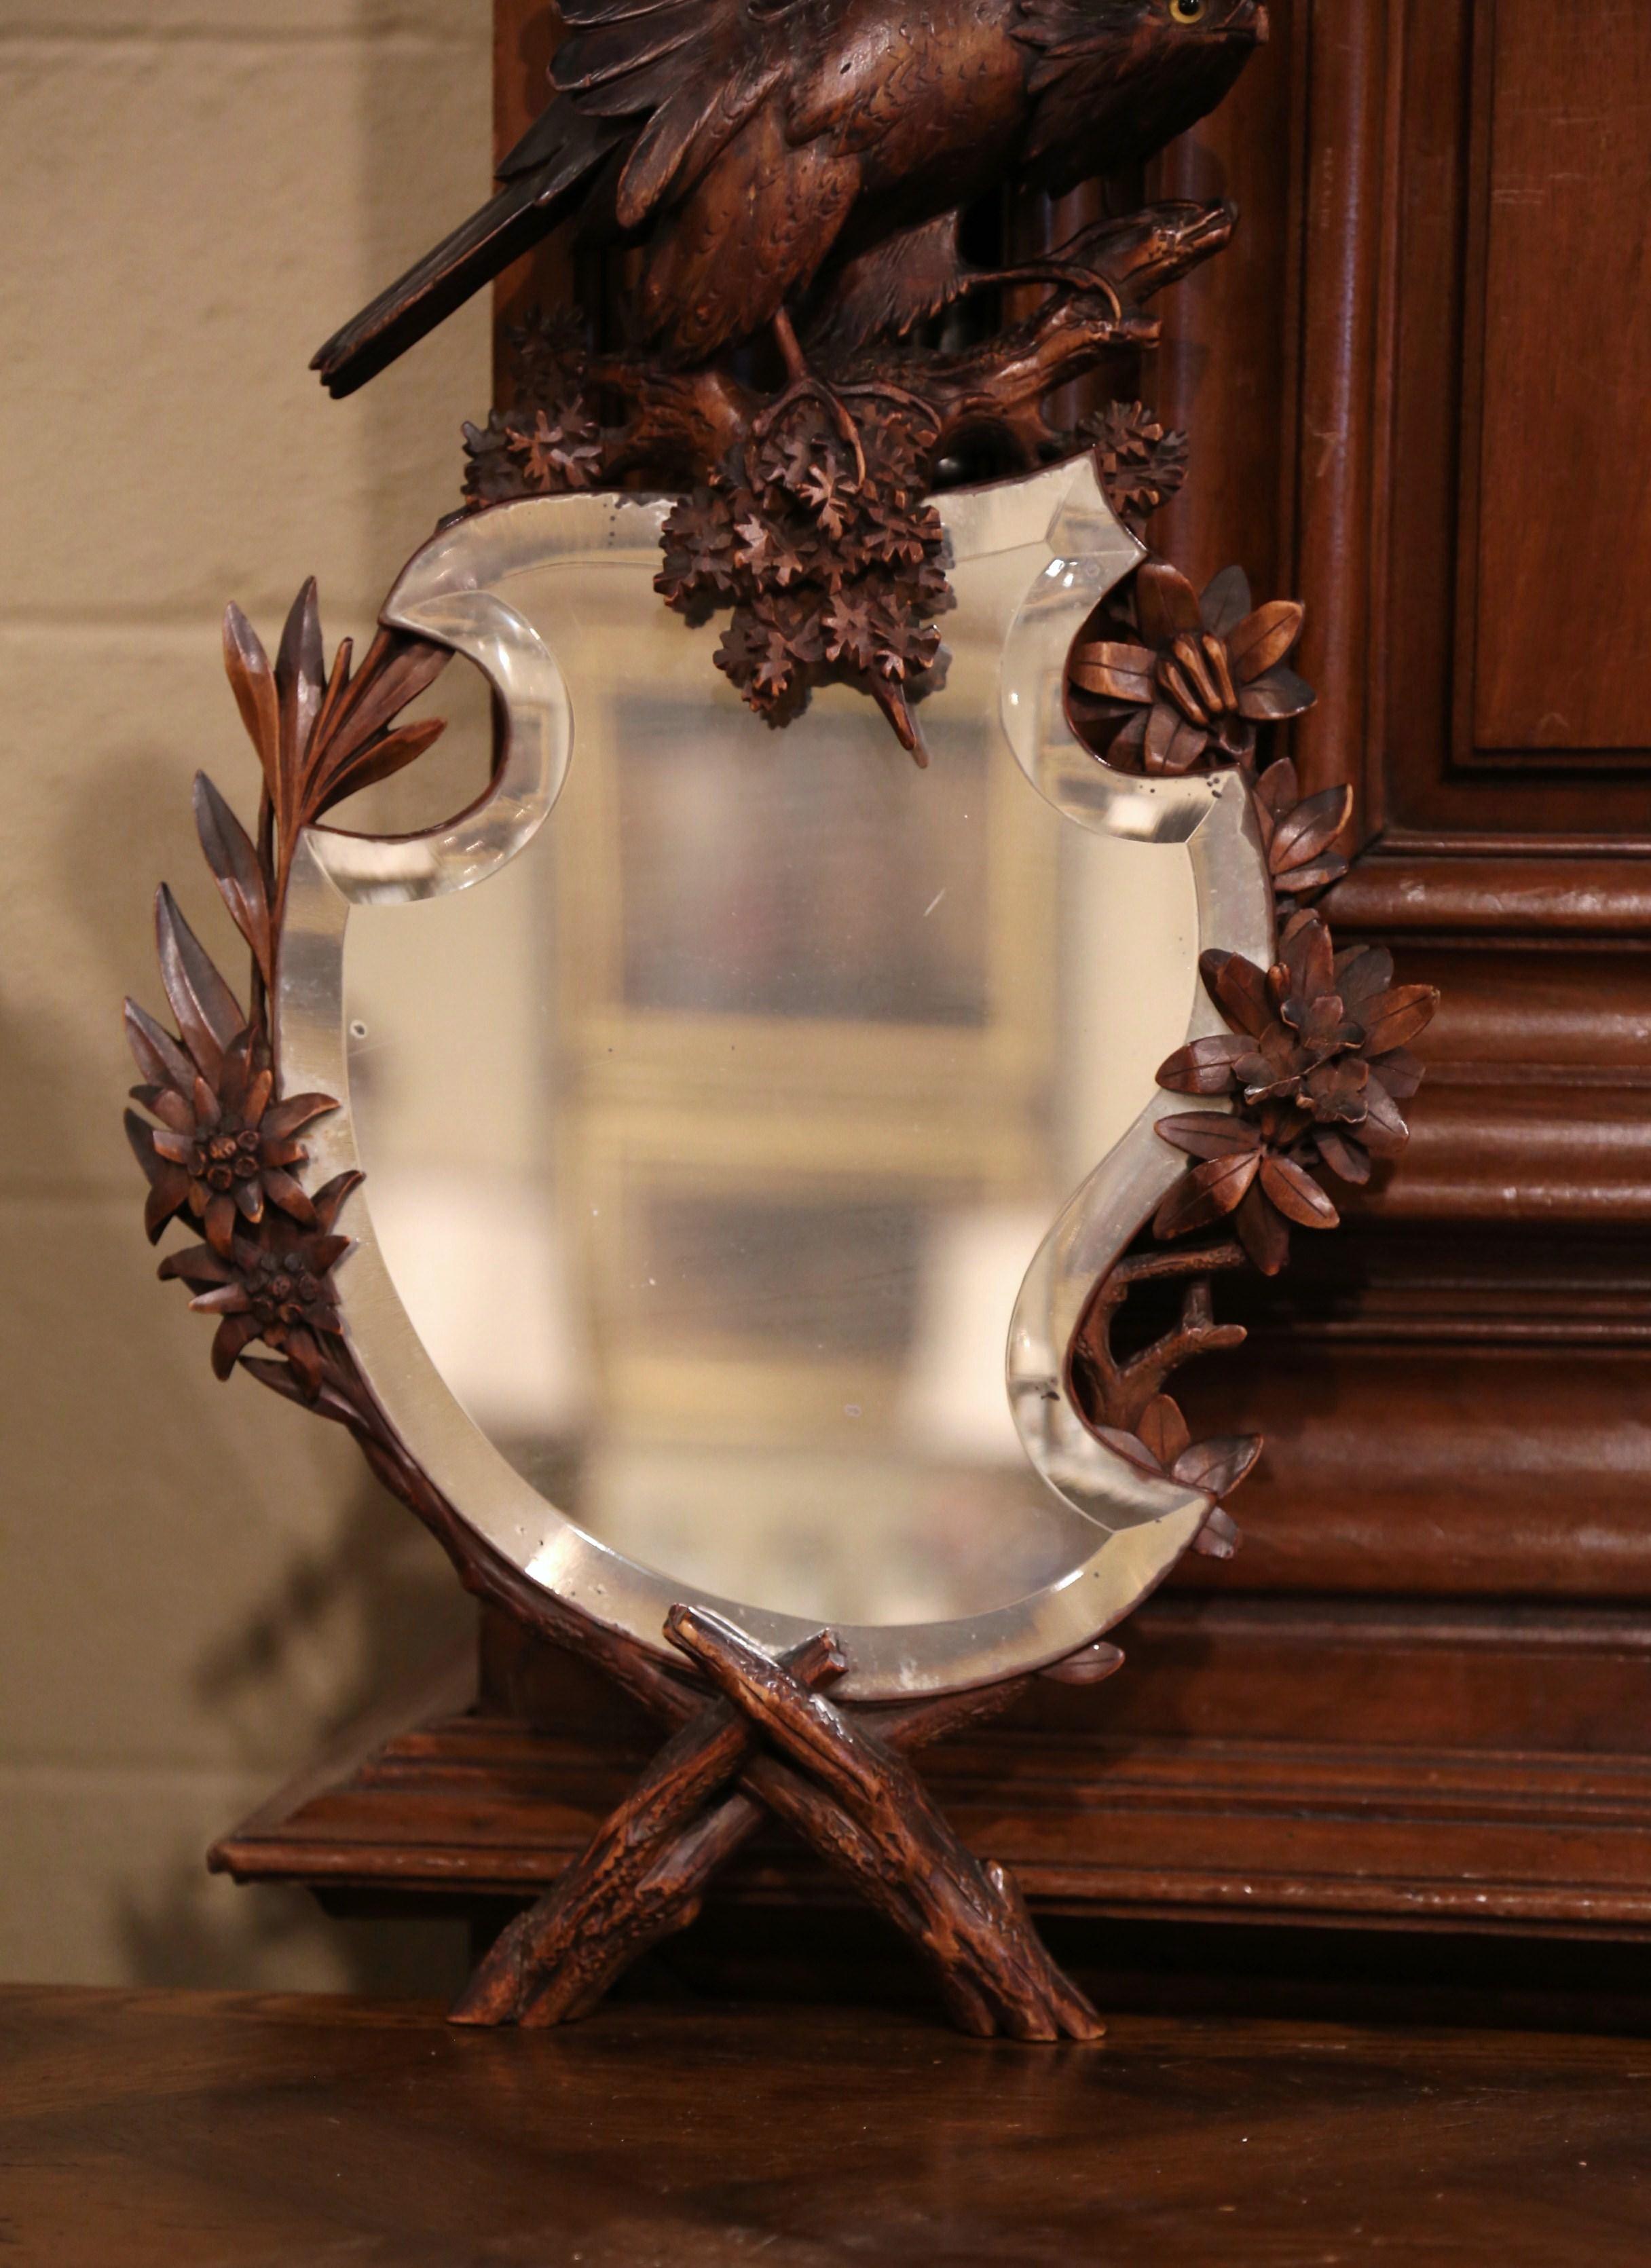 Beveled 19th Century French Black Forest Carved Walnut Mirror with Eagle Sculpture